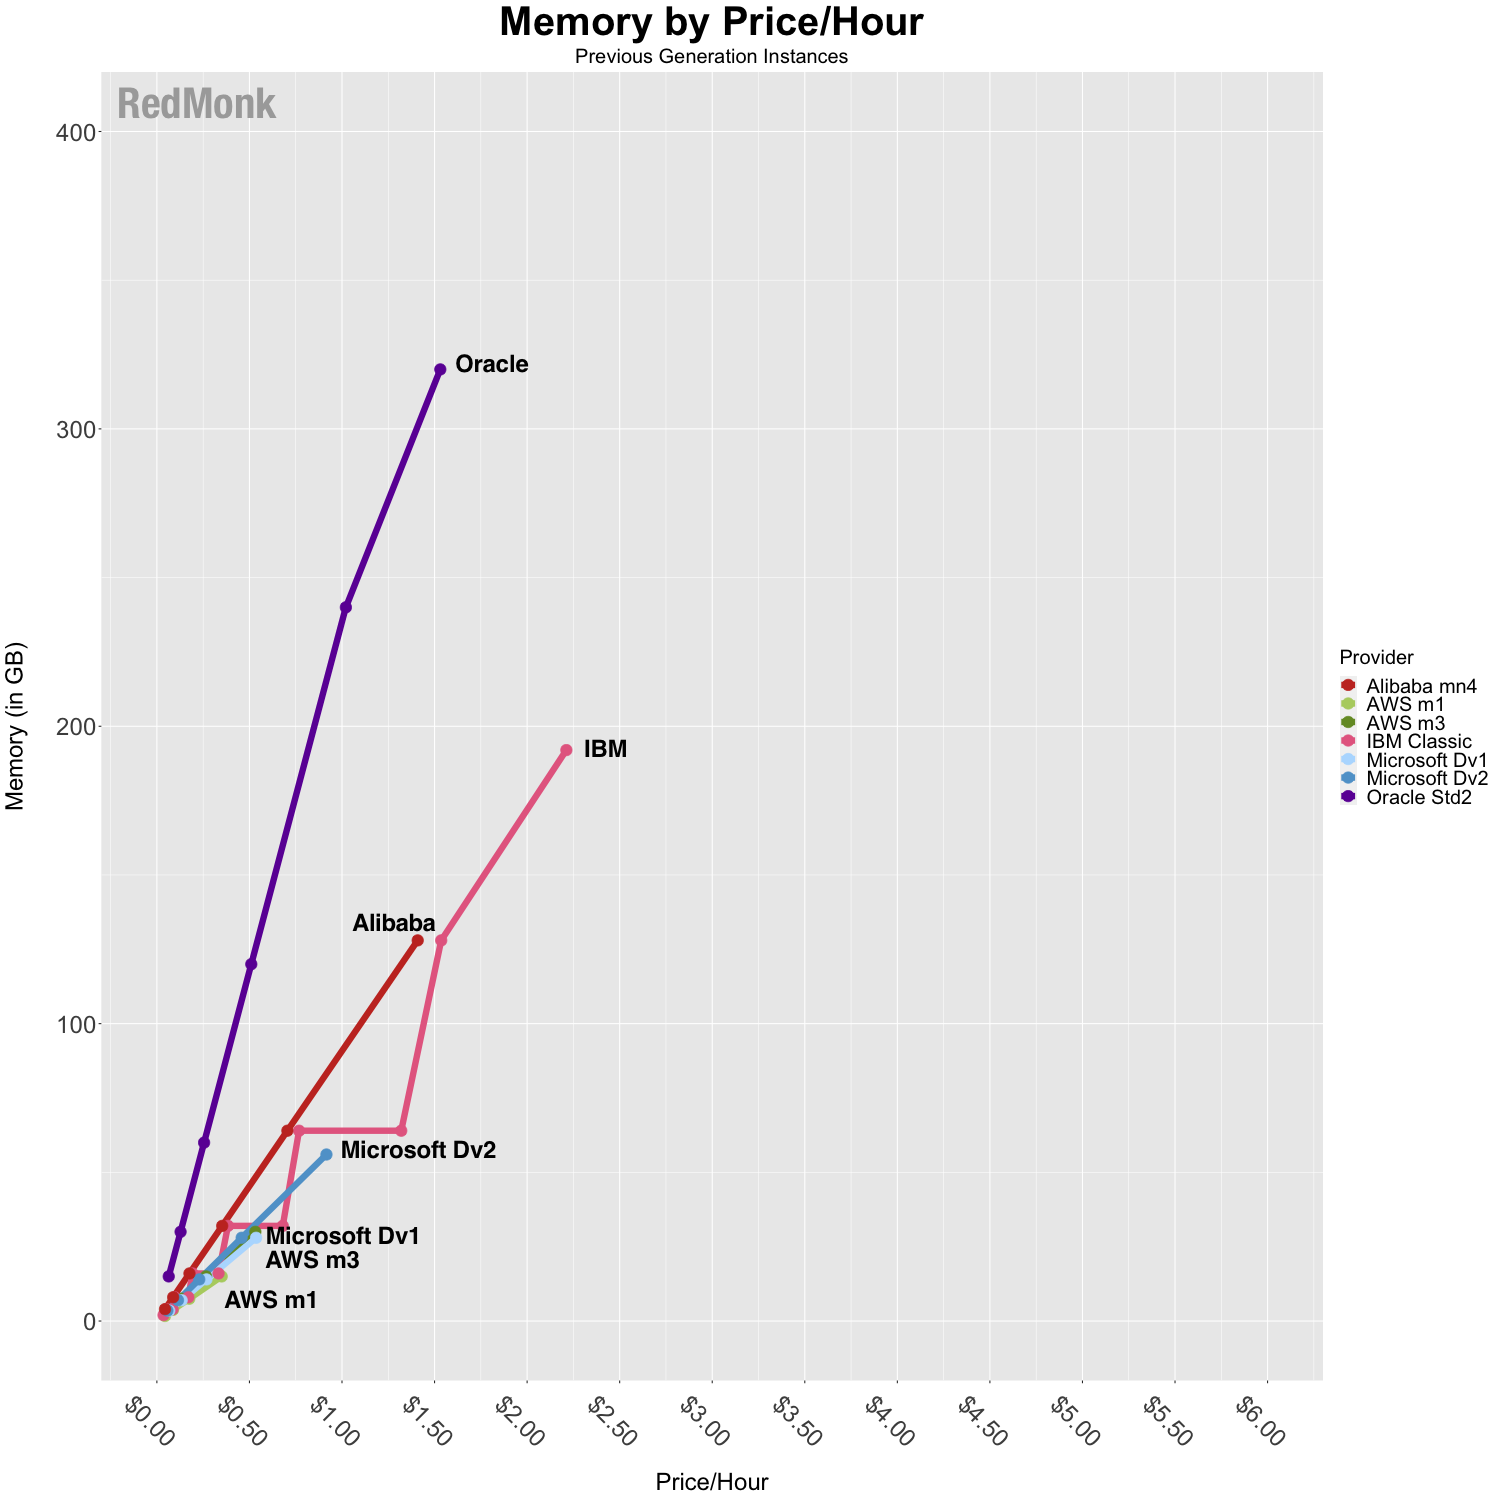 Comparison of IaaS Memory Pricing, previous instance generations. X-Axis is price/hour, Y-Axis is GB of Memory